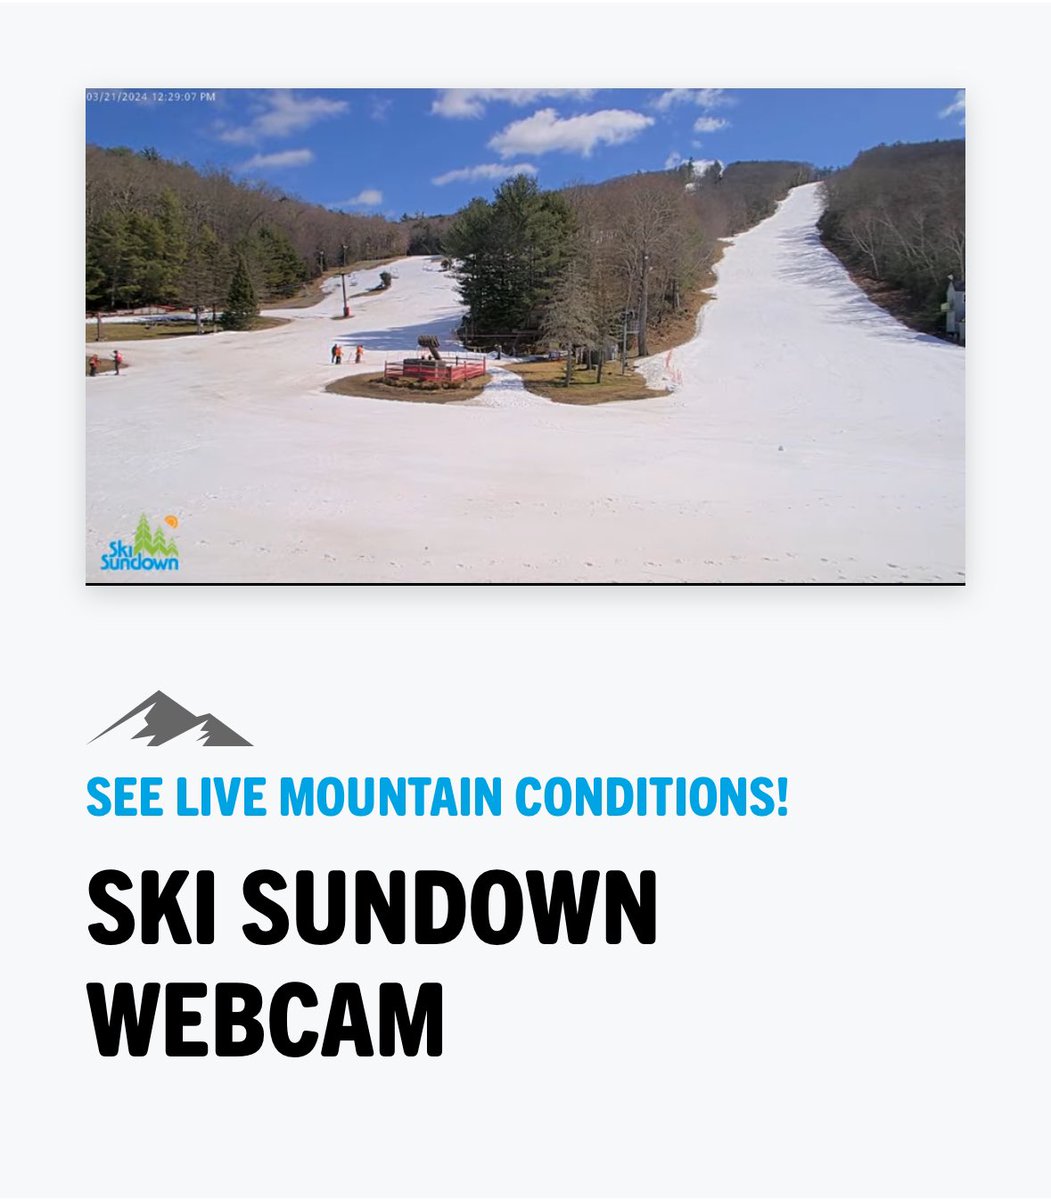 Still 100% Open. A beautiful day to be on the mountain! Check out our live webcam at skisundown.com/#webcam